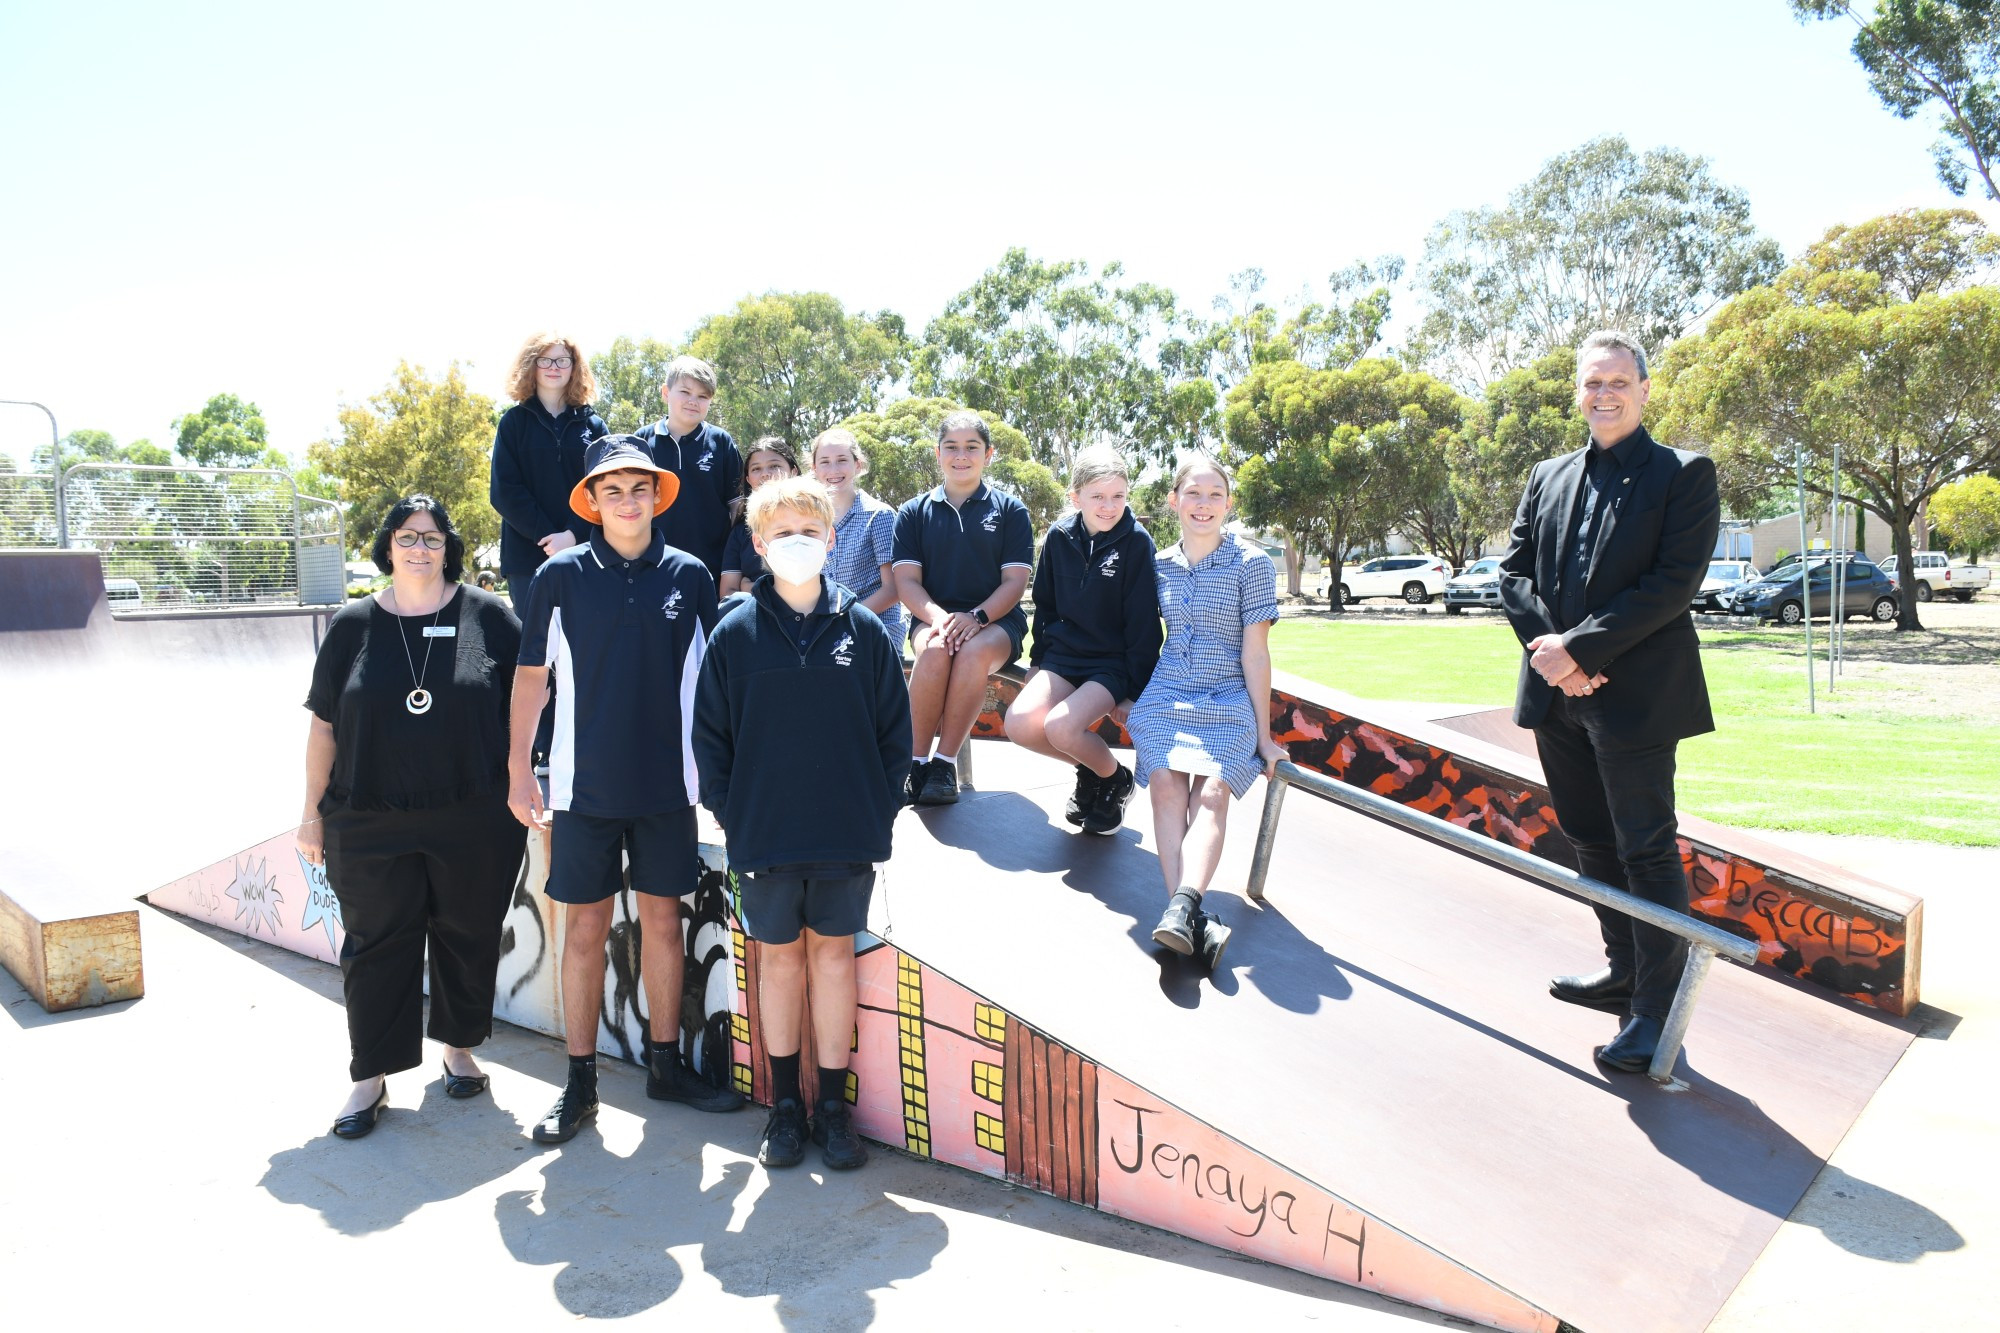 PARK HOPES: Yarriambiack Shire mayor Kylie Zanker gathers with Murtoa College Year 7 students and Western Victorian MP Andy Meddick at the Rabl Park skate precinct, which is set to receive an upgrade thanks to student and community campaigning. Photo: JESSIE GARTLAN.